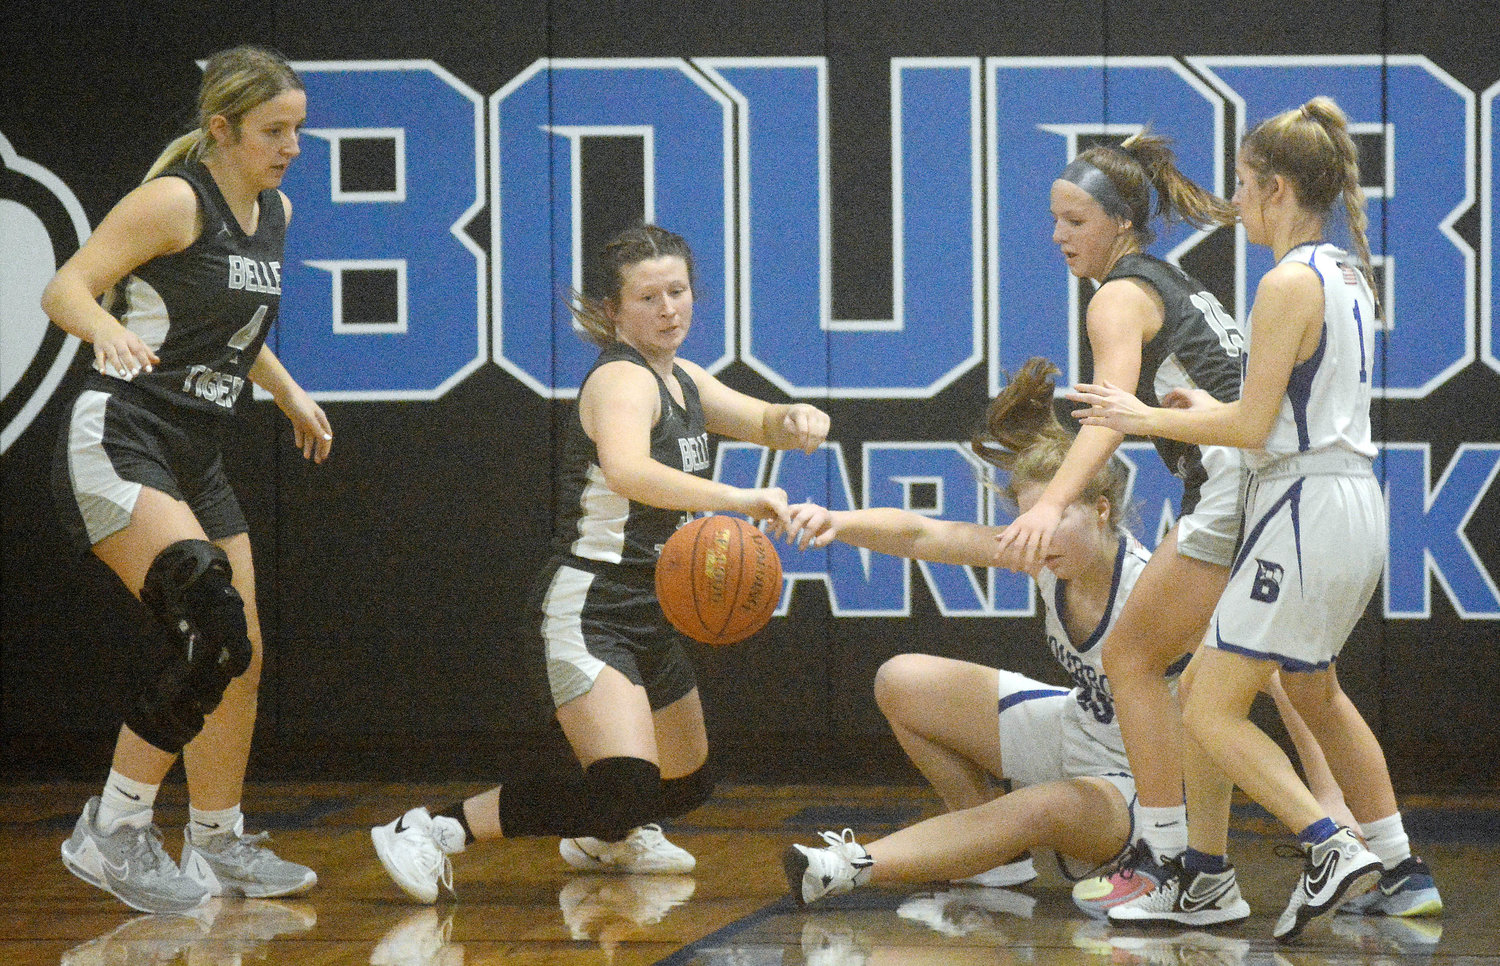 A scramble for a loose ball ensued during Gasconade Valley Conference (GVC) girls basketball action last Wednesday night in Bourbon between Belle’s Lady Tigers and the host Lady Warhawks. Lady Tigers shown (above, from left) include Miranda Sanders, Molly Busch and Anastyn Lansford. Belle will wrap up the 2022 portion of their season tonight (Wednesday) in a Highway 28 showdown at Dixon against the Lady Bulldogs.